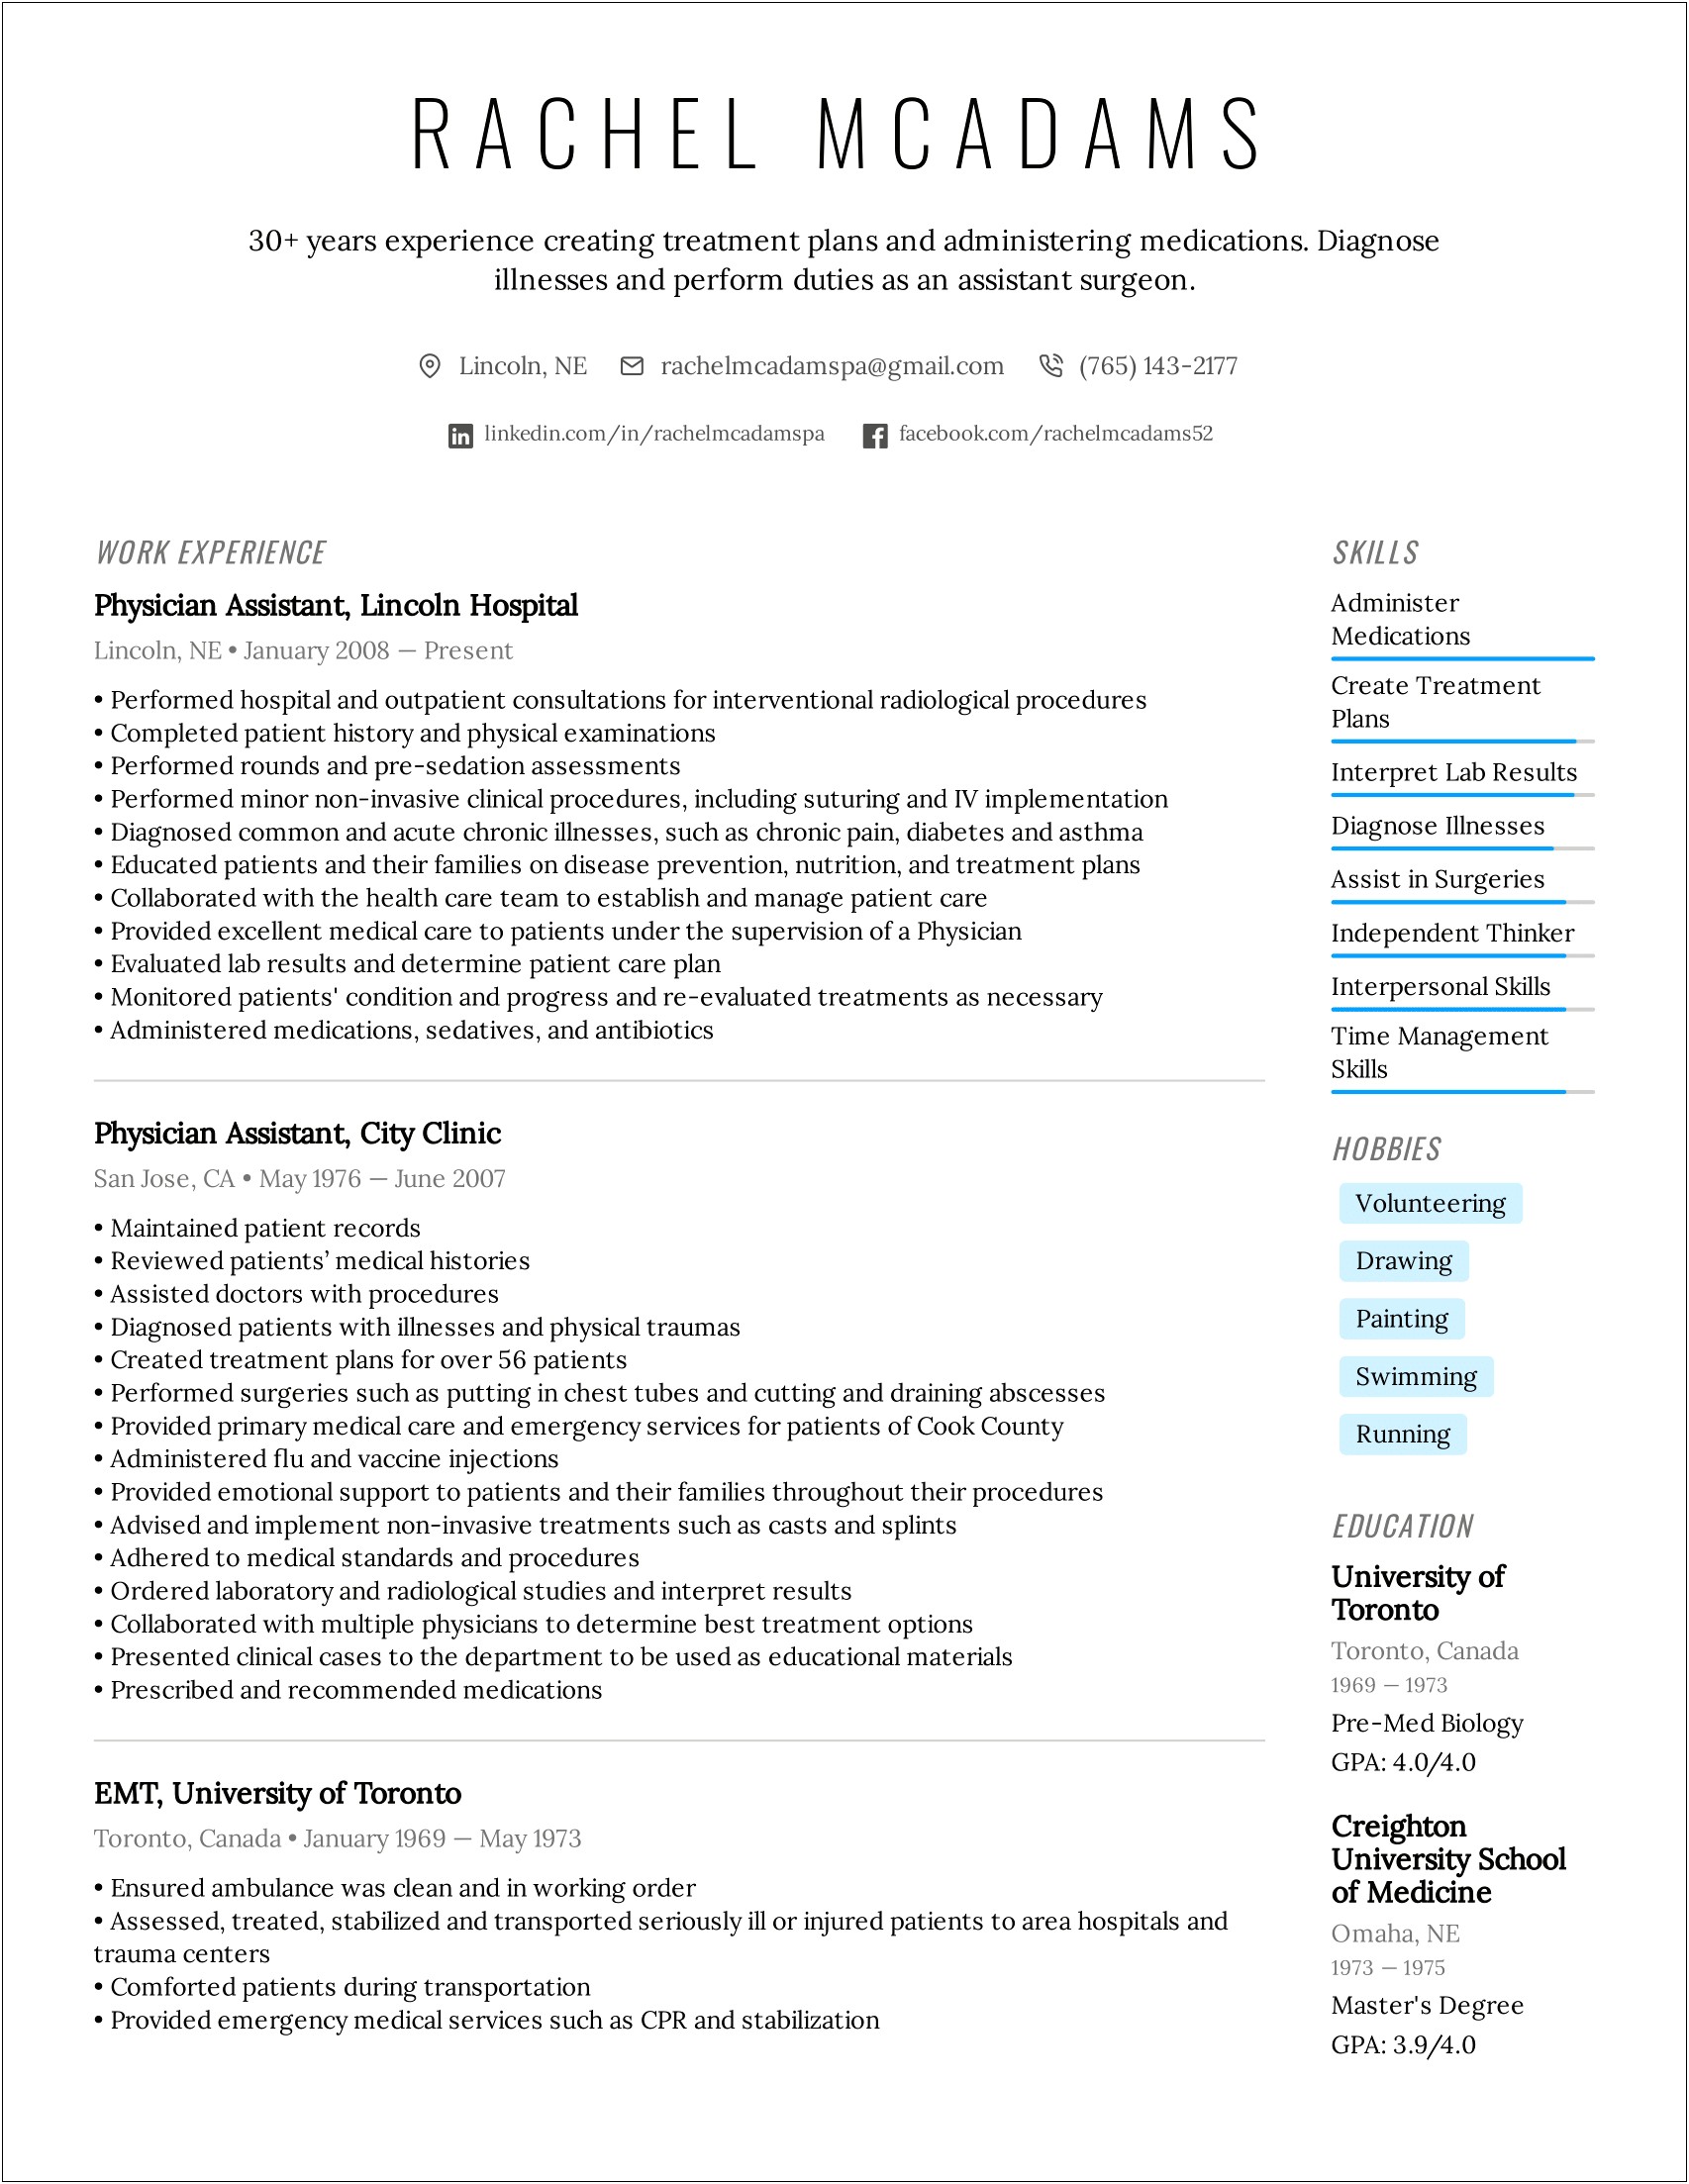 Resume Objective To Work In A Hospital